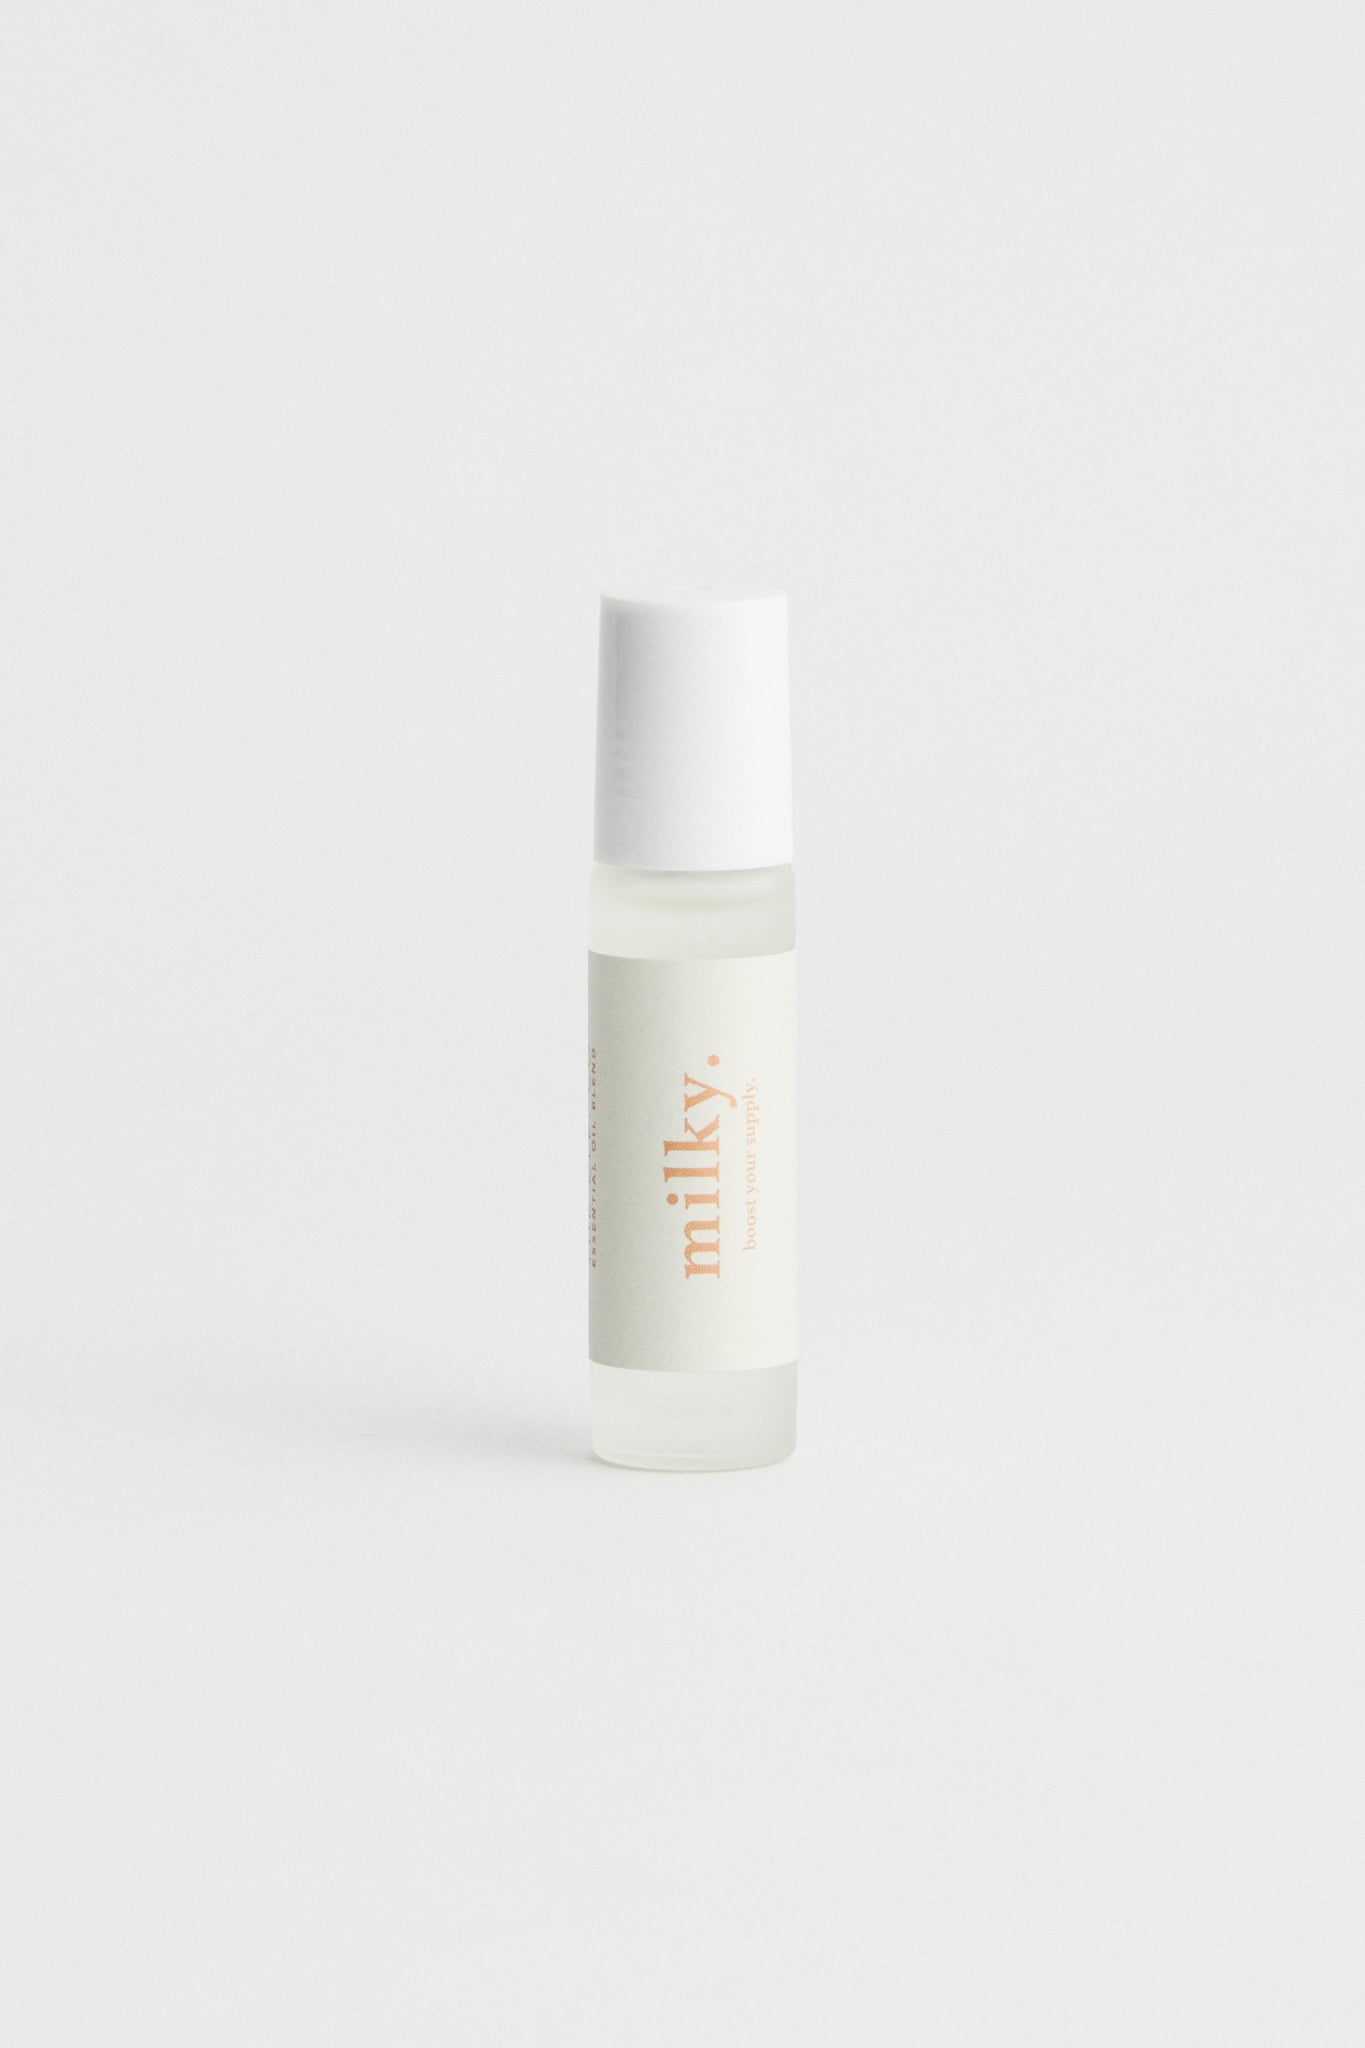 Clear bottle, white lid essential oil roller bottle. White branding with Milky text.